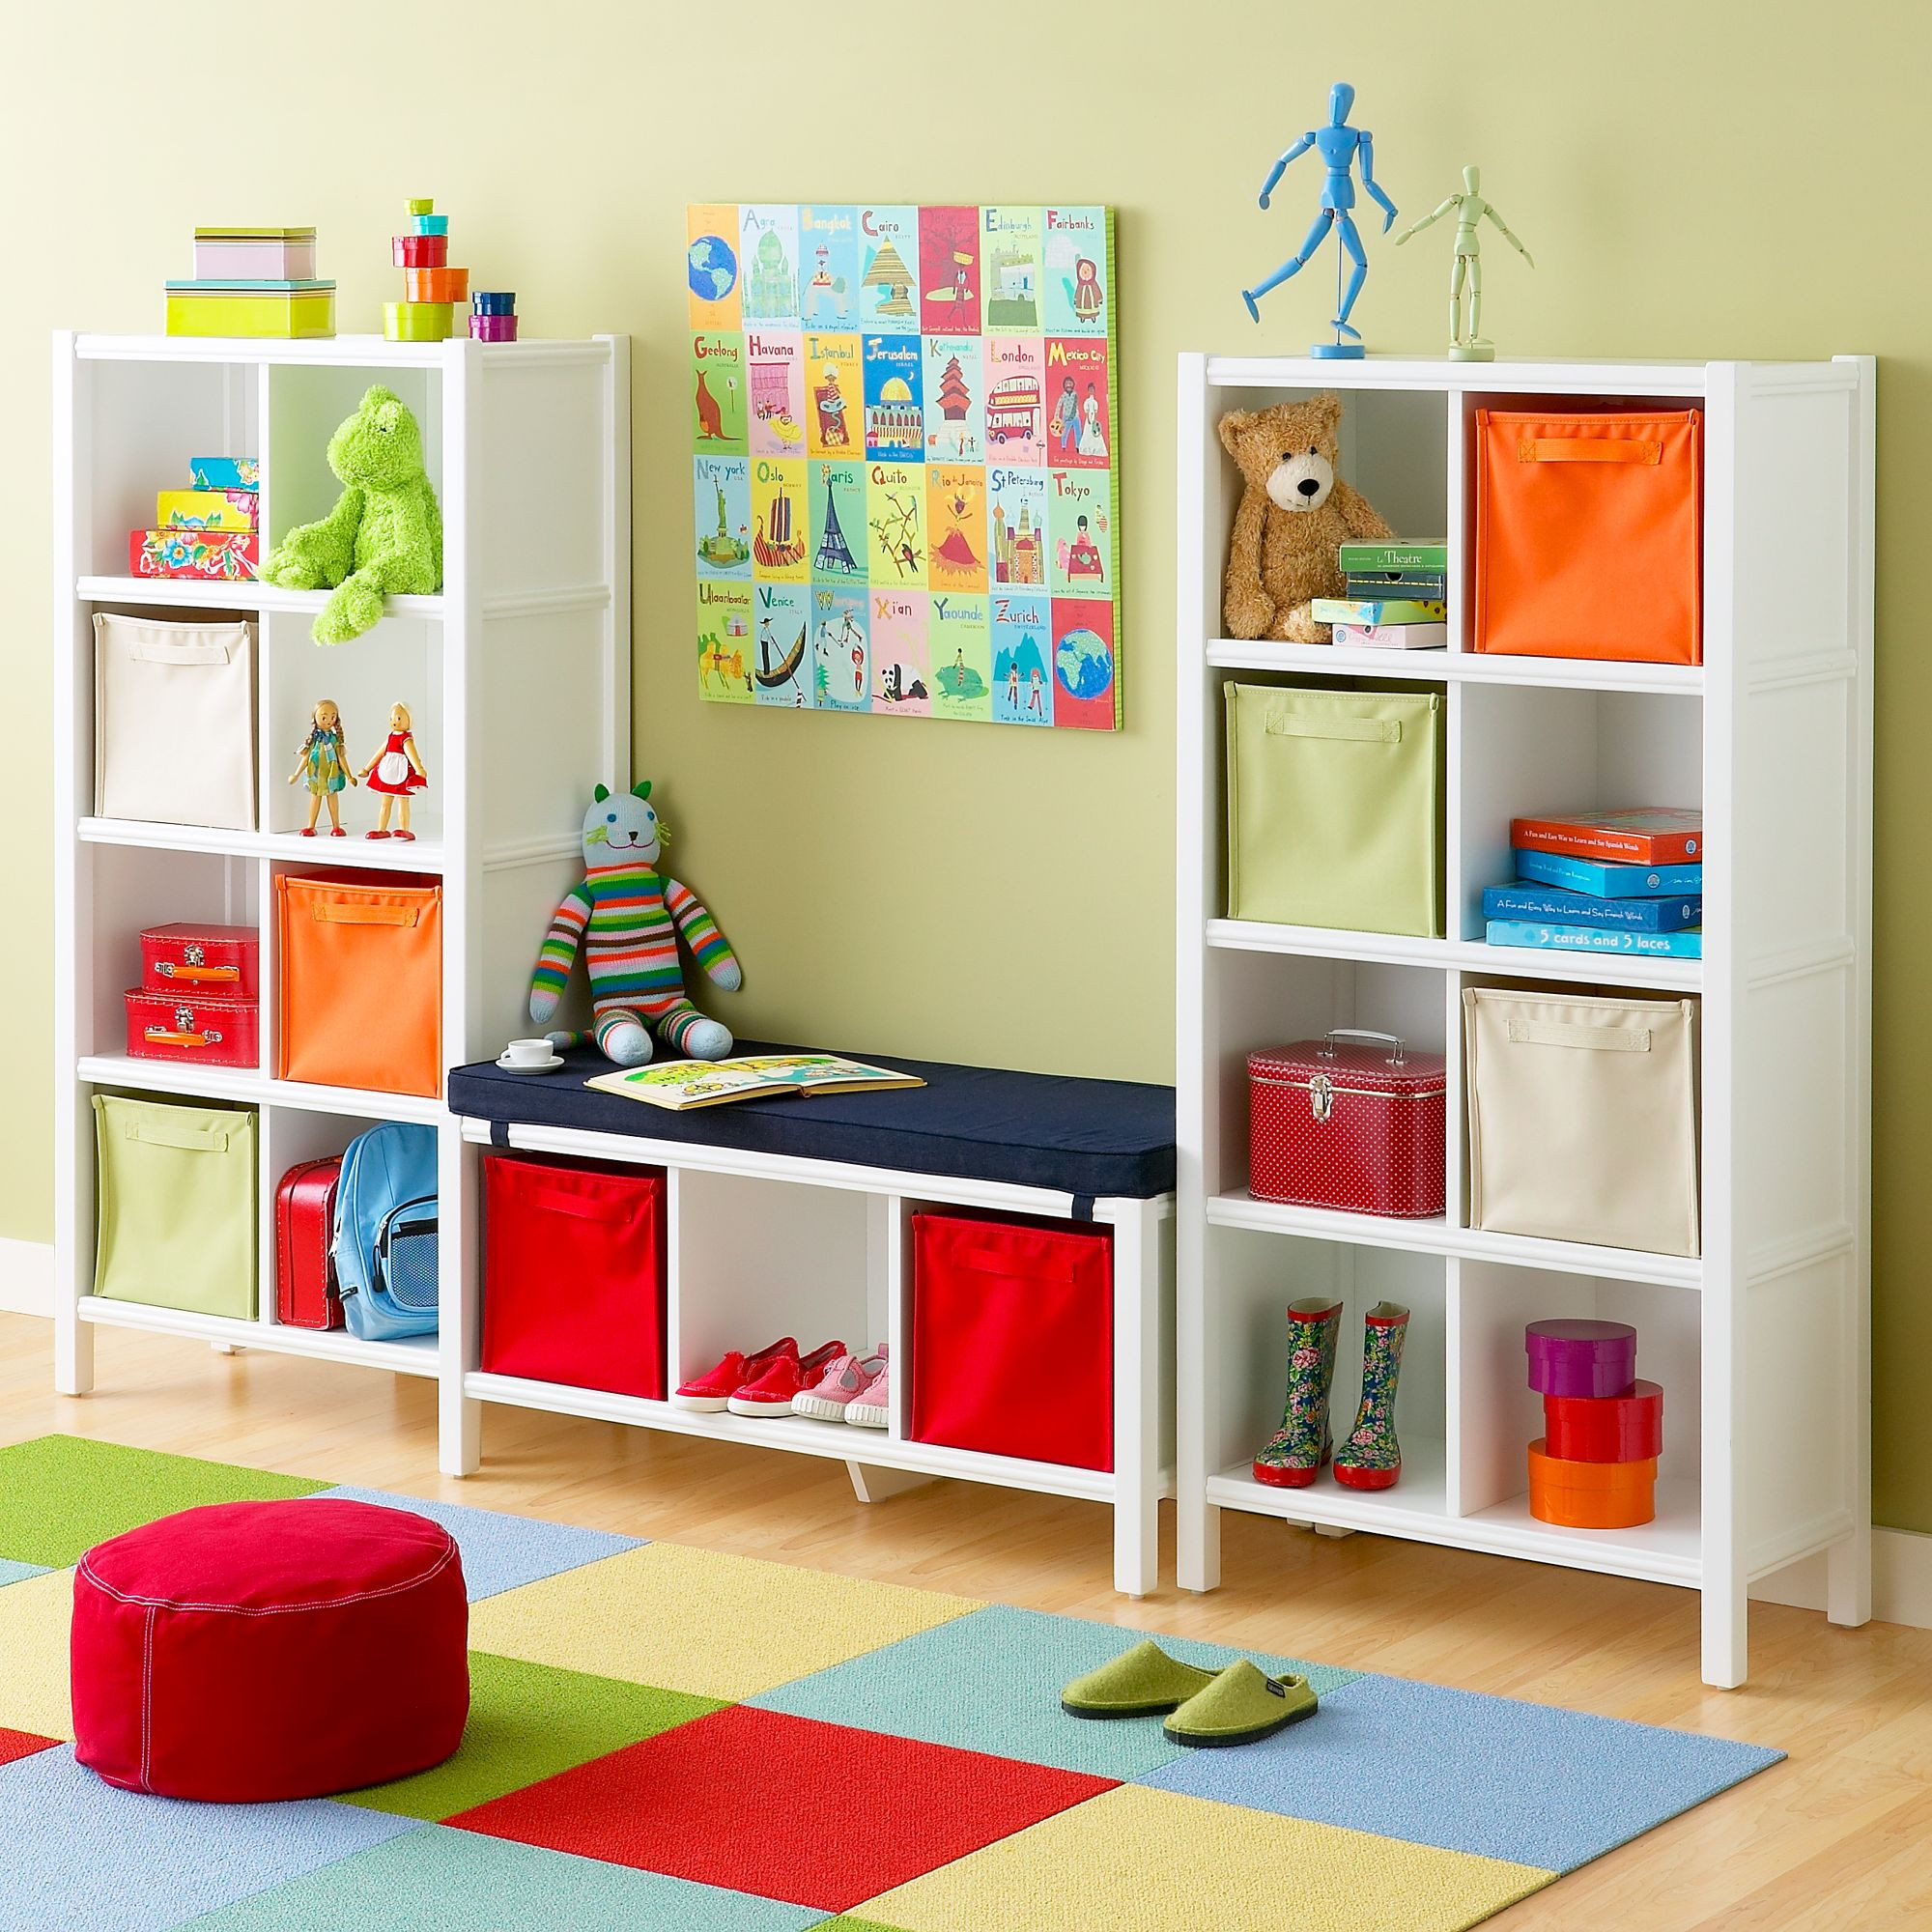 Kids Bedroom Storage Ideas
 301 Moved Permanently